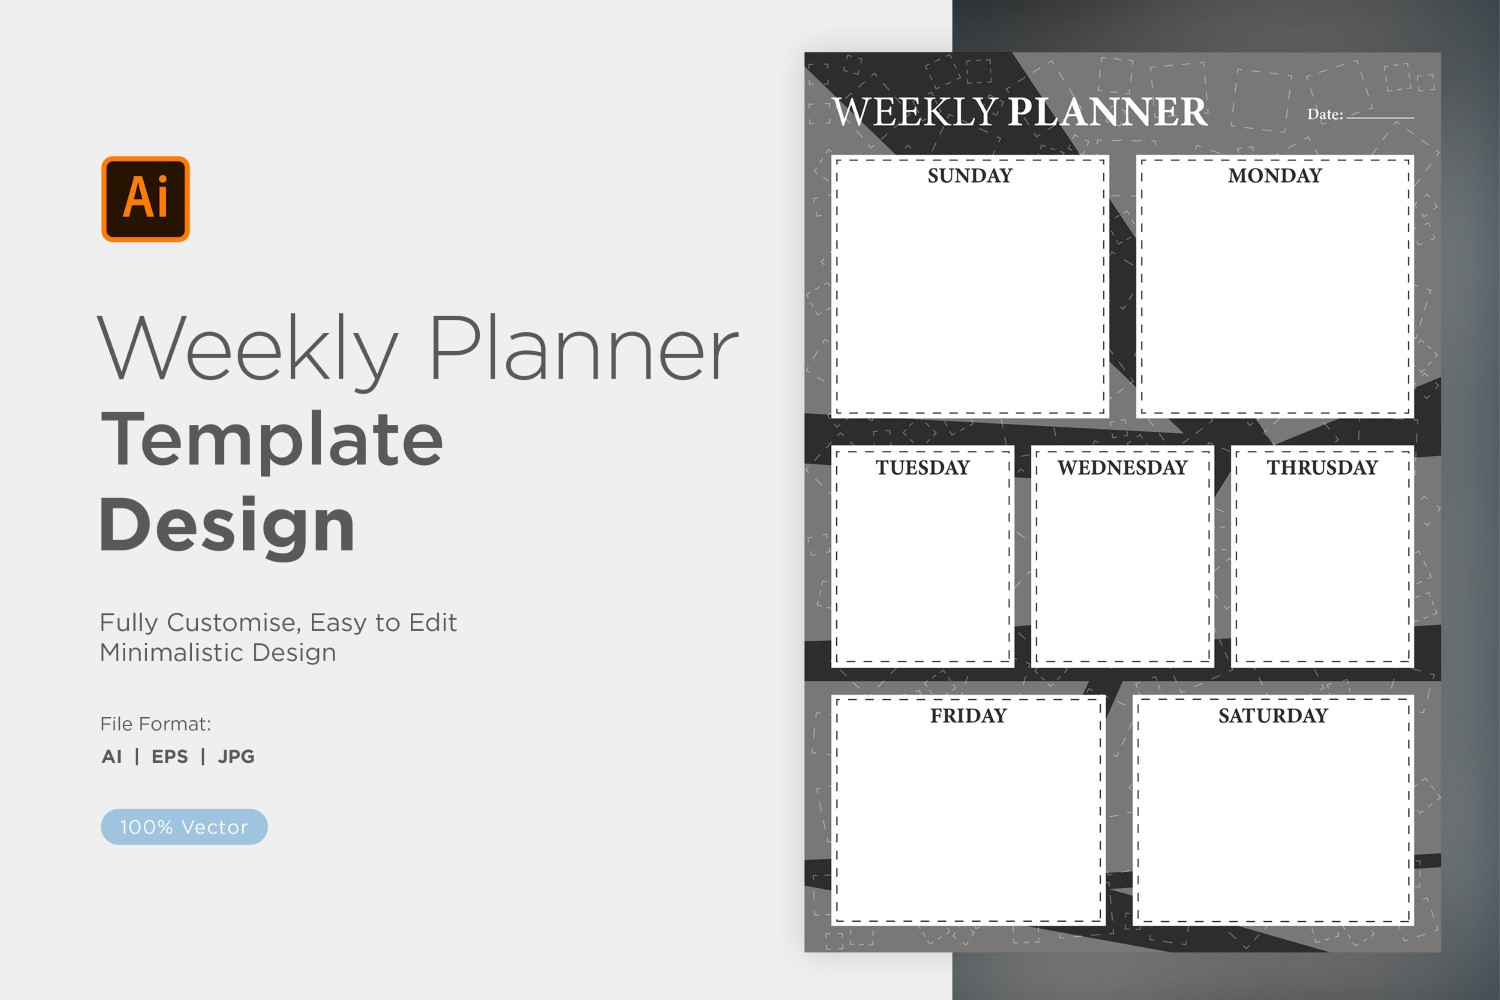 Kit Graphique #357825 Weekly Planner Divers Modles Web - Logo template Preview